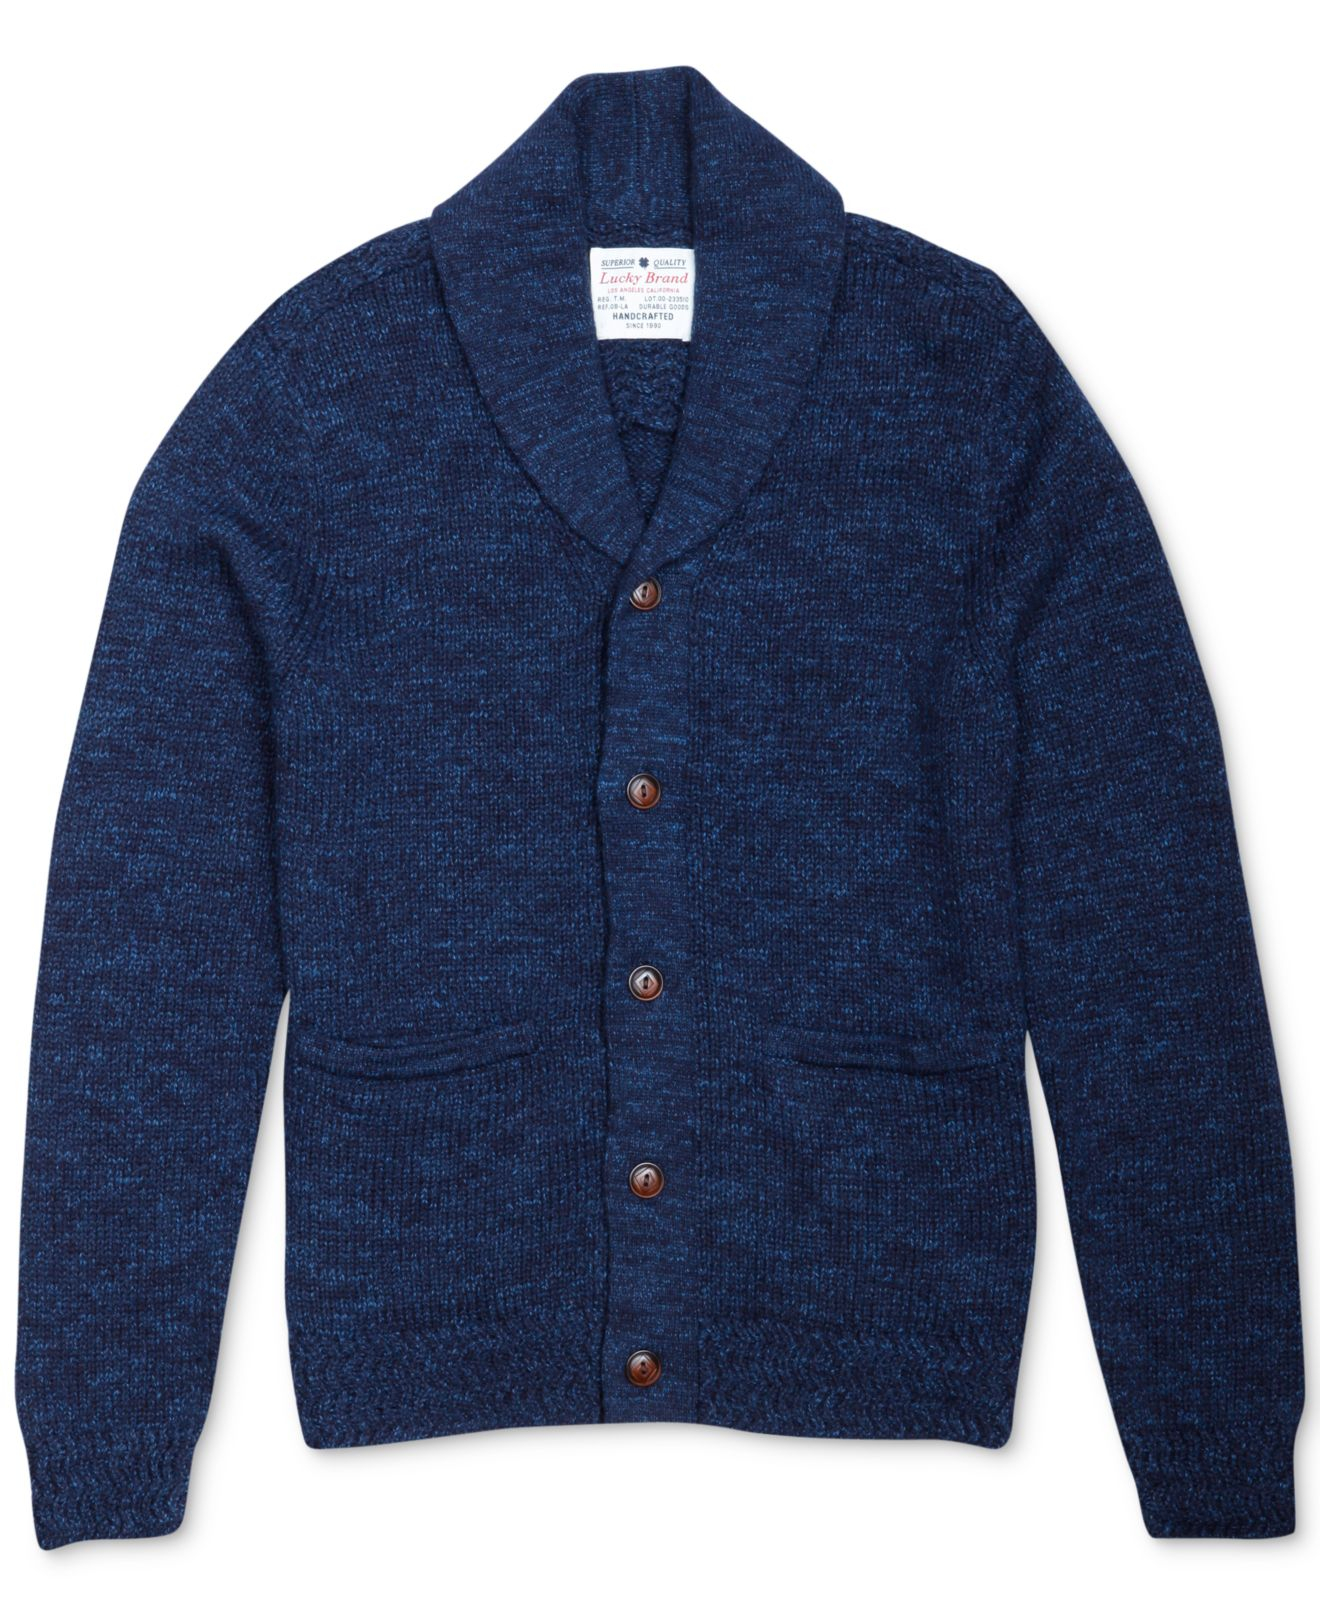 Lucky brand Marled Shawl-Collar Cardigan in Blue for Men | Lyst